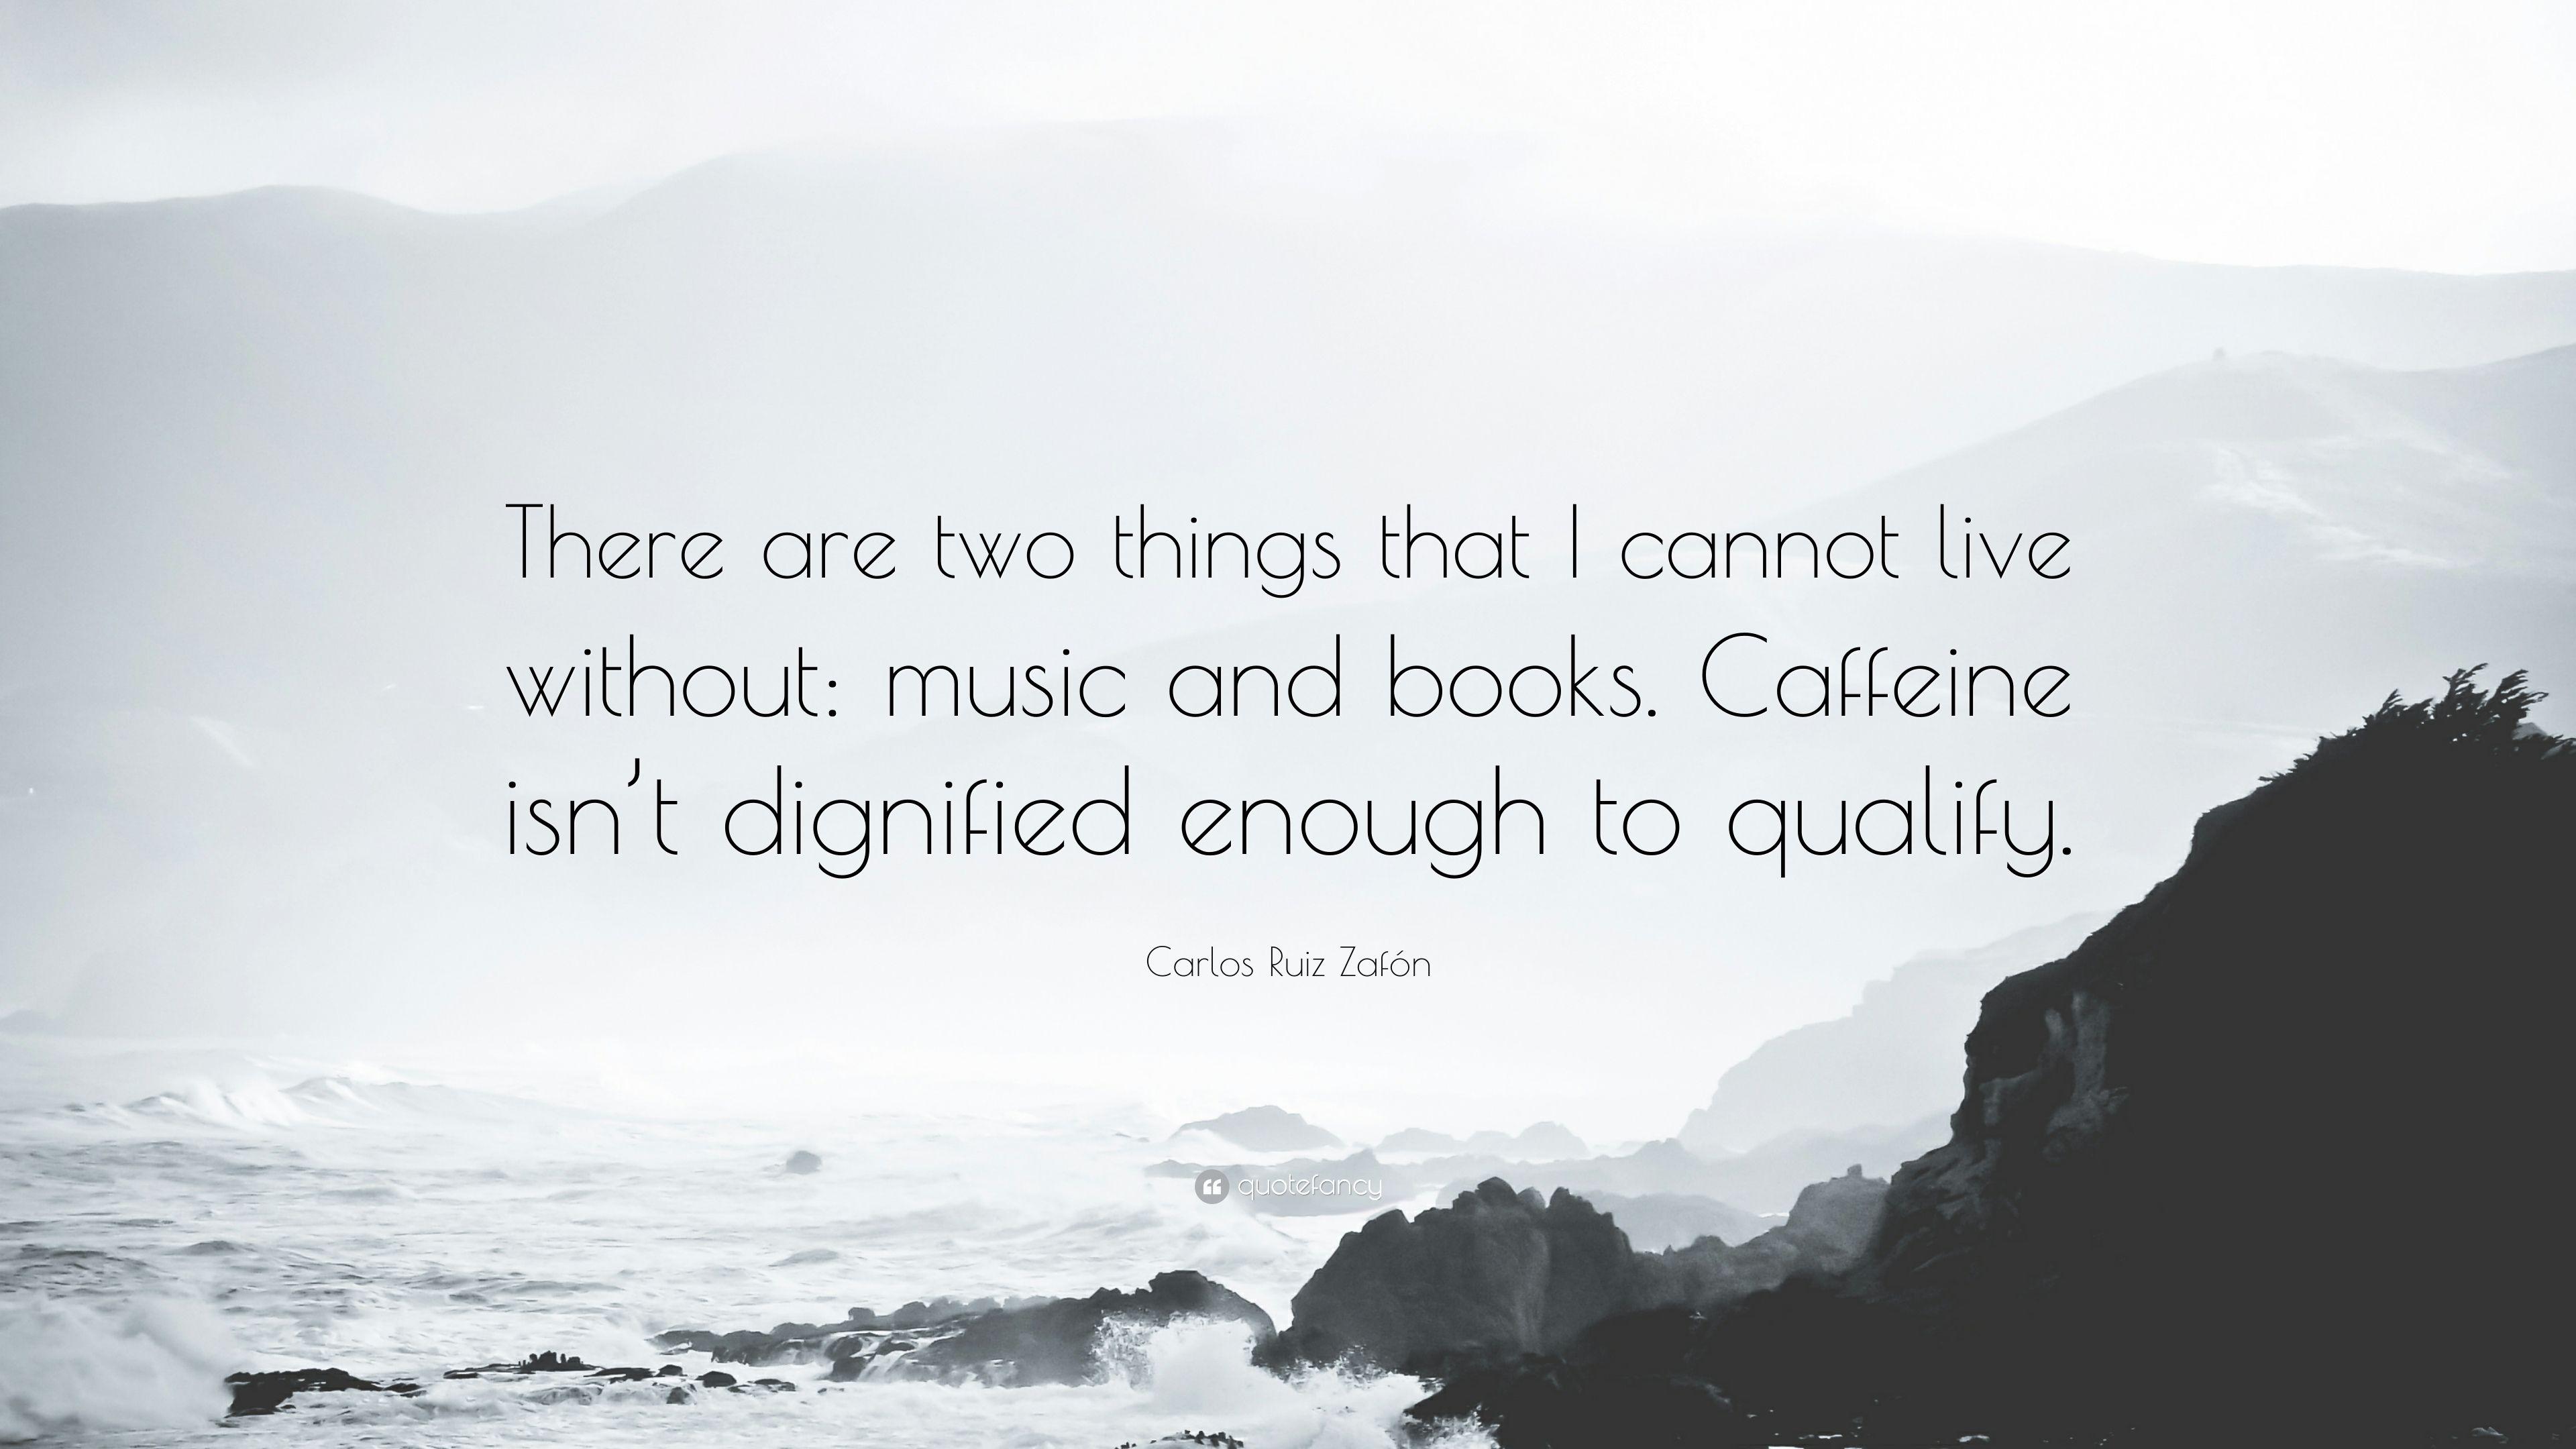 Carlos Ruiz Zafón Quote: “There are two things that I cannot live